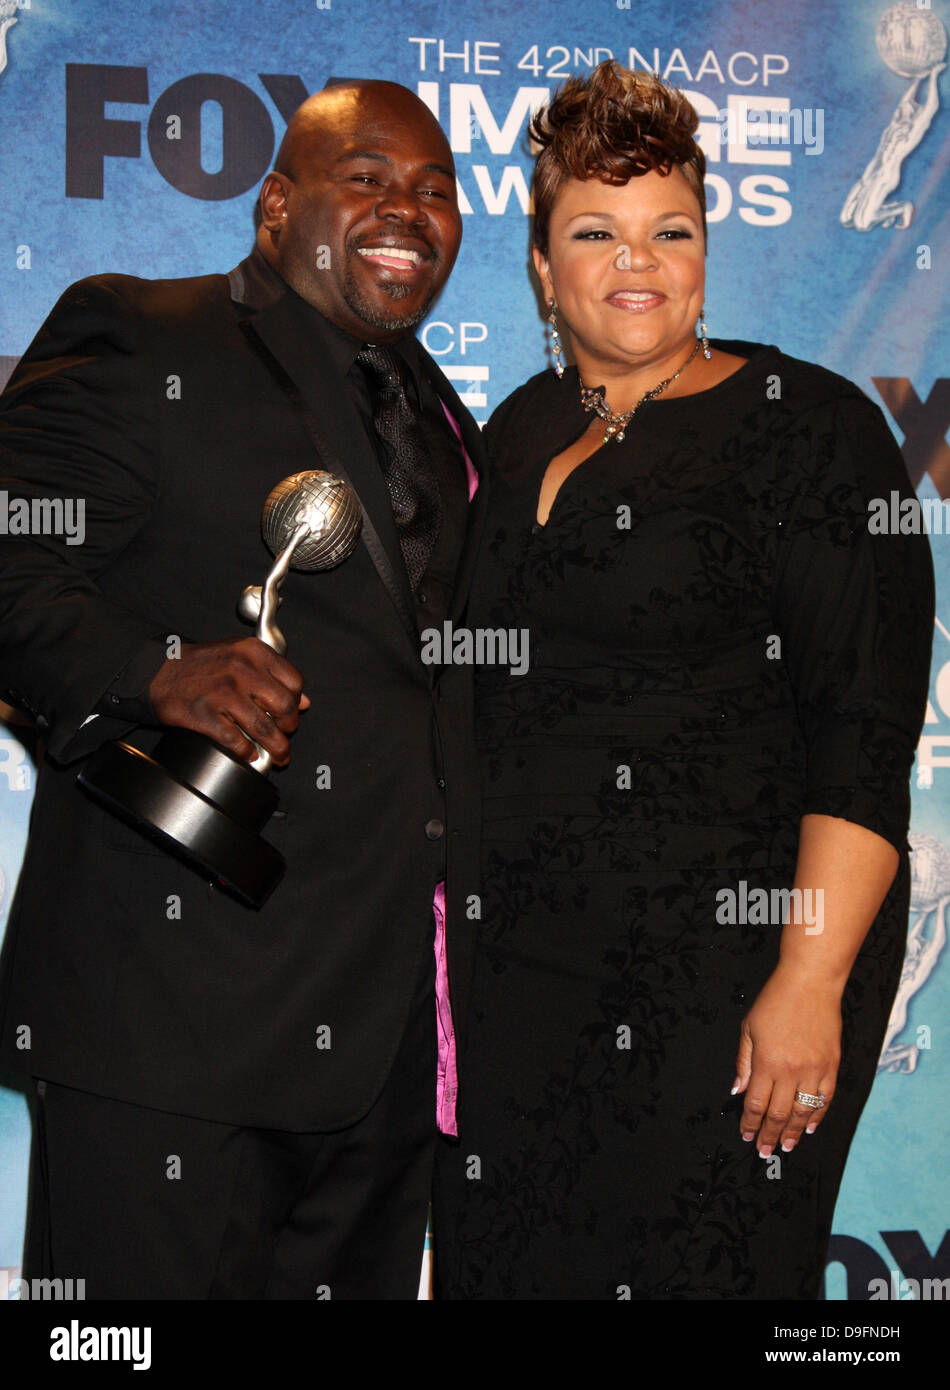 Tamela Mann Los Angeles Premiere of 'Tyler Perry's Madea's Big Happy  Family' held At The Arclight Cinemas Hollywood, California - 19.04.11 Stock  Photo - Alamy